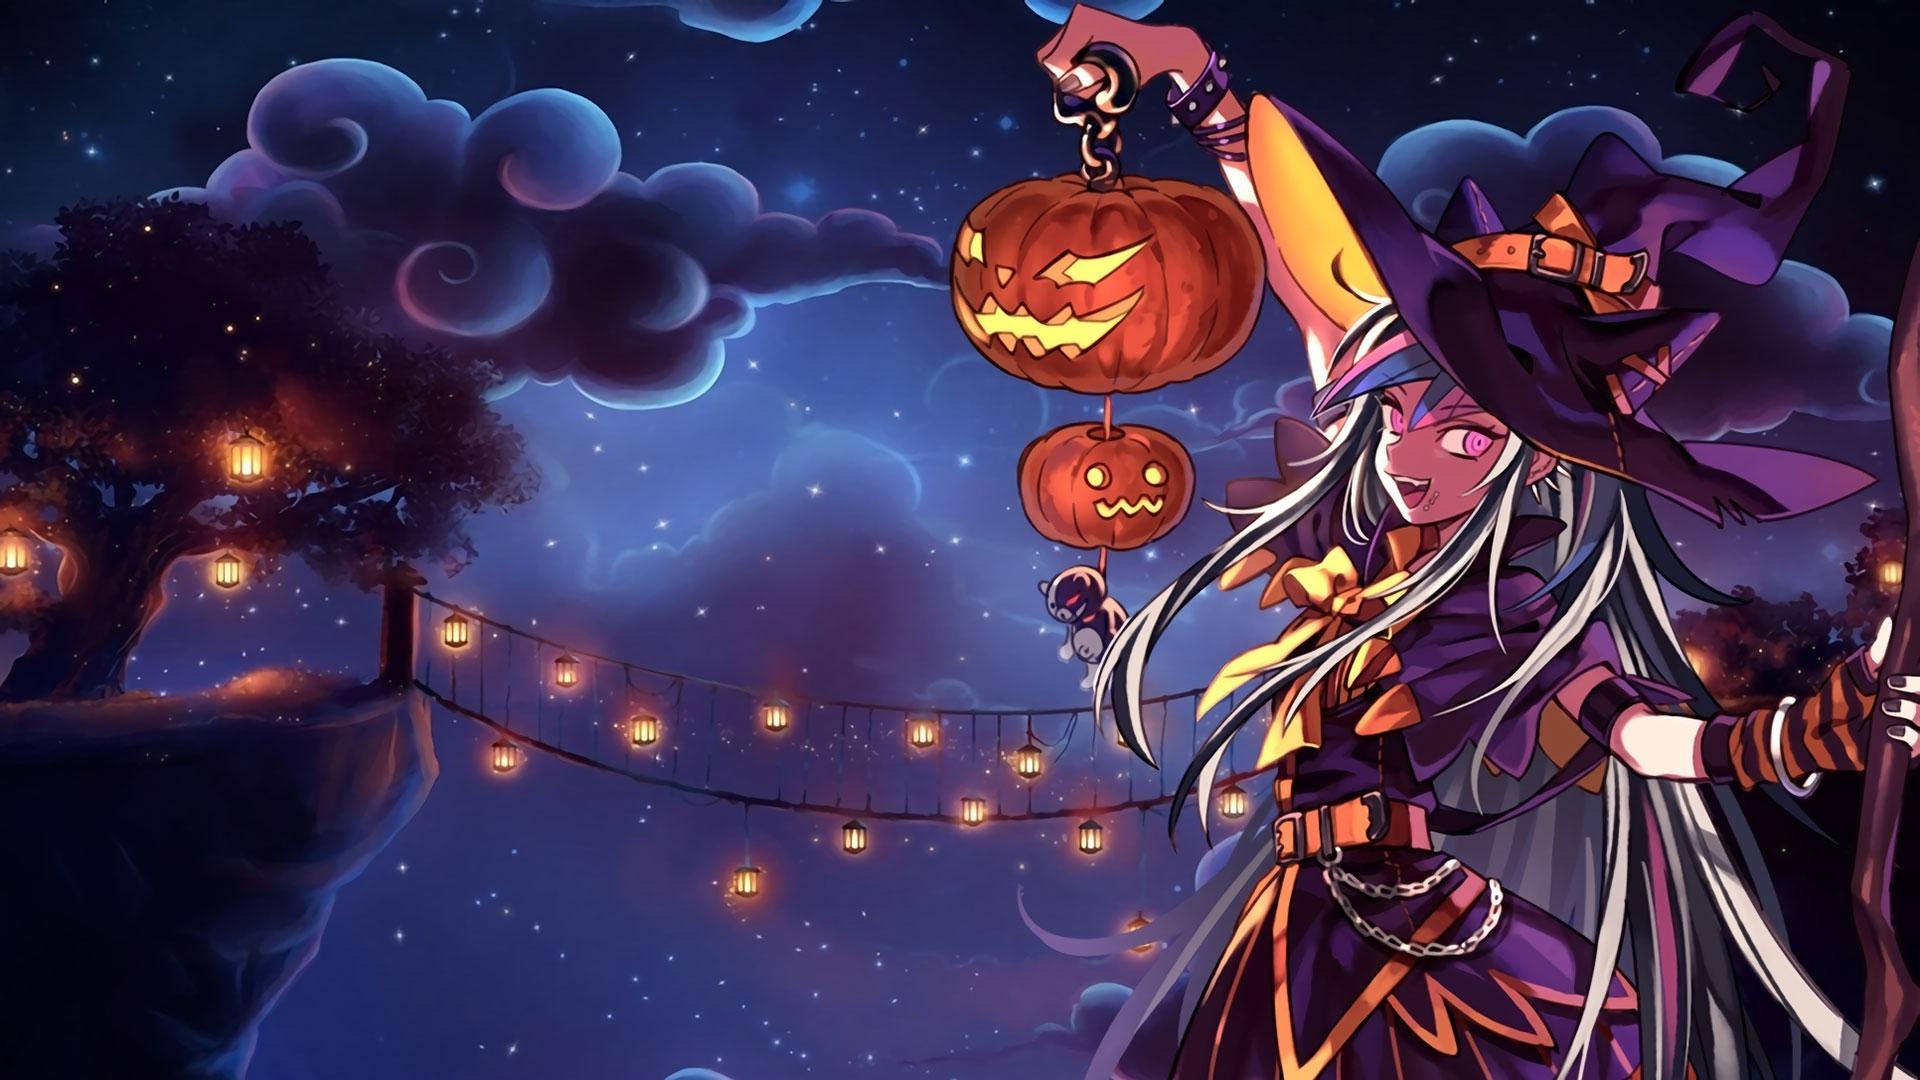 Scary Halloween 2019 Wallpaper HD, Background, Pumpkins, Witches, Bats & Ghosts